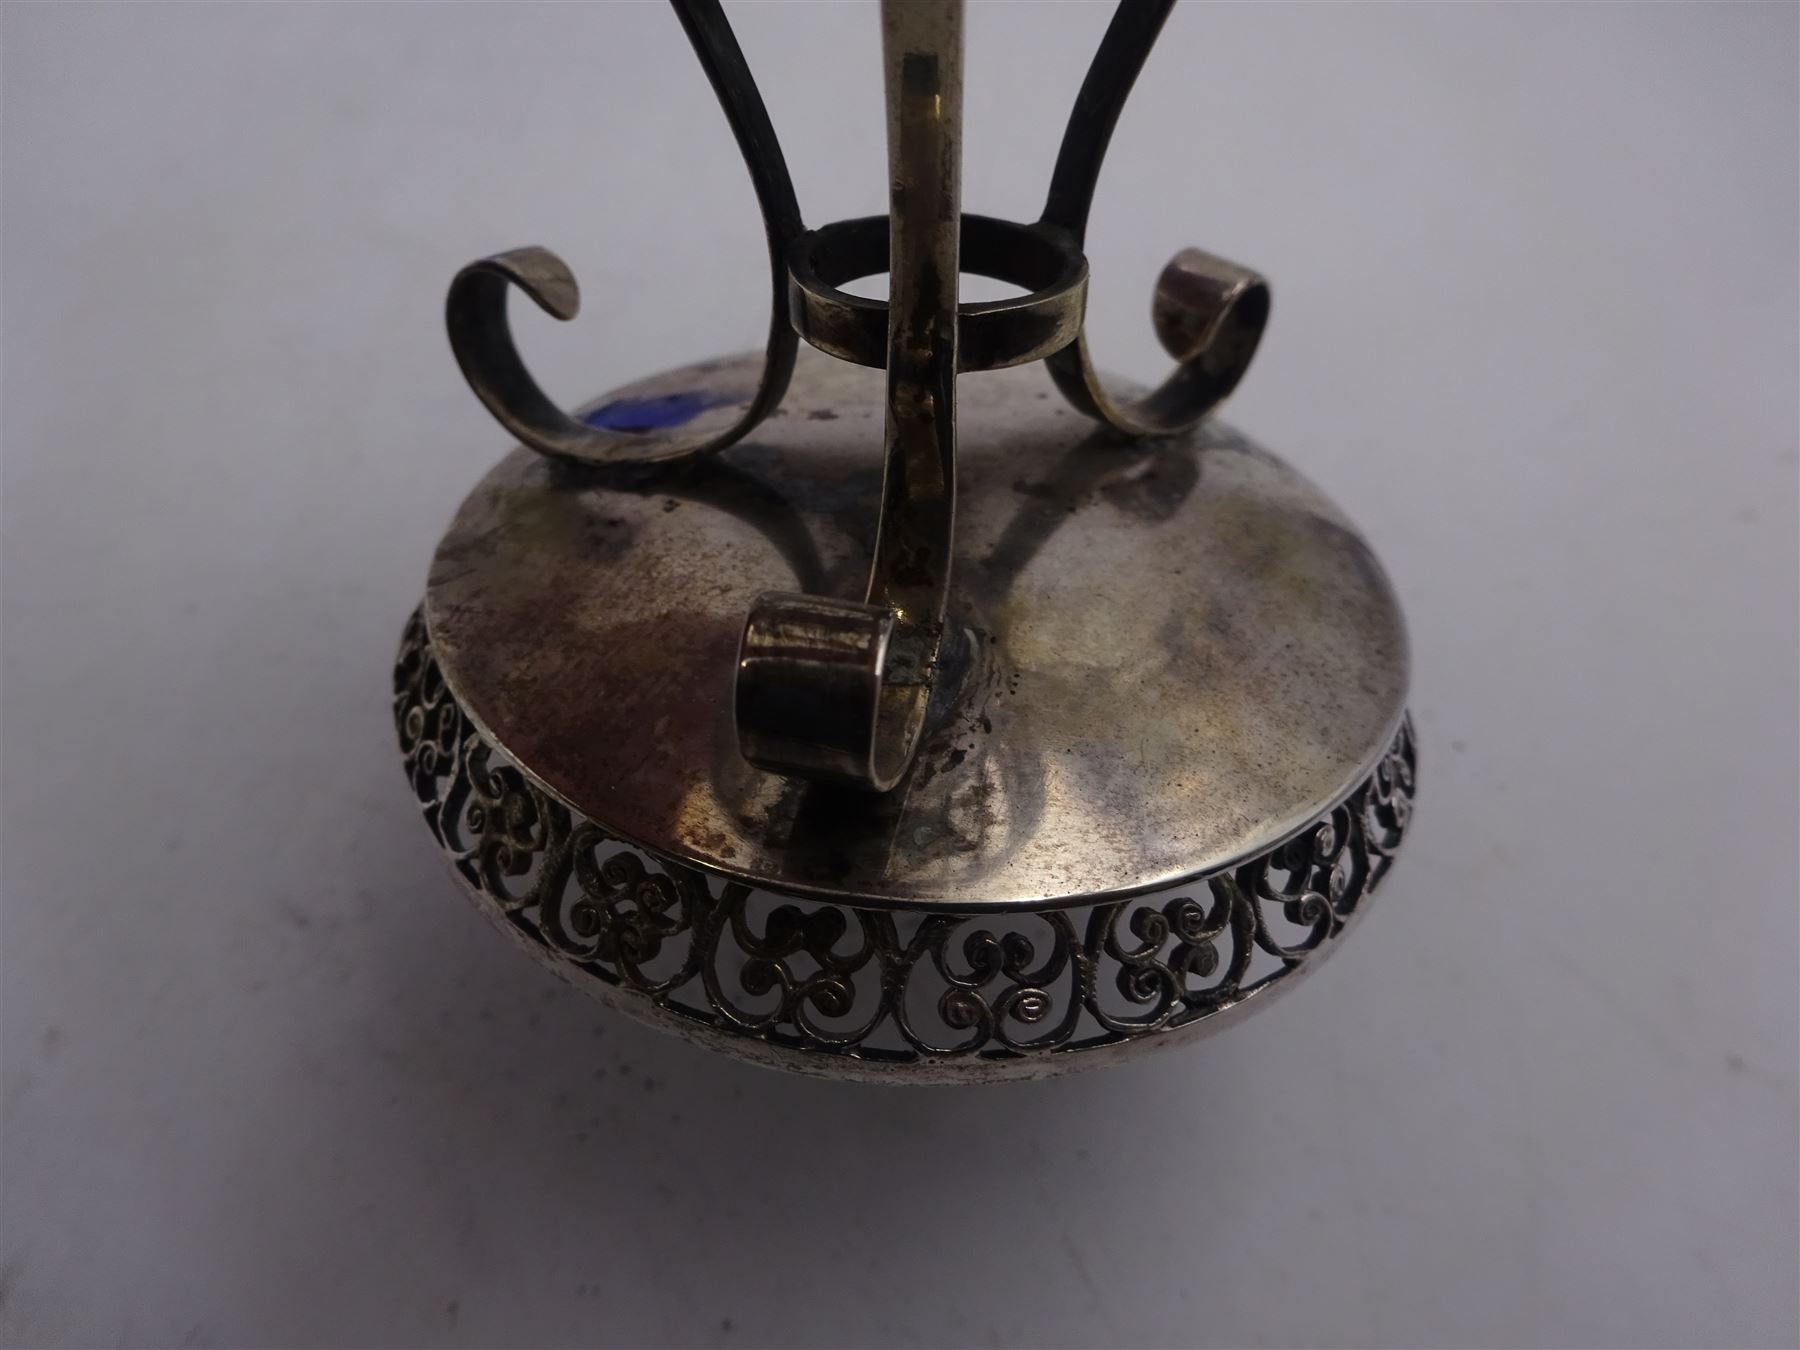 19th/early 20th century silver bon bon dish with blue glass liner - Image 5 of 5